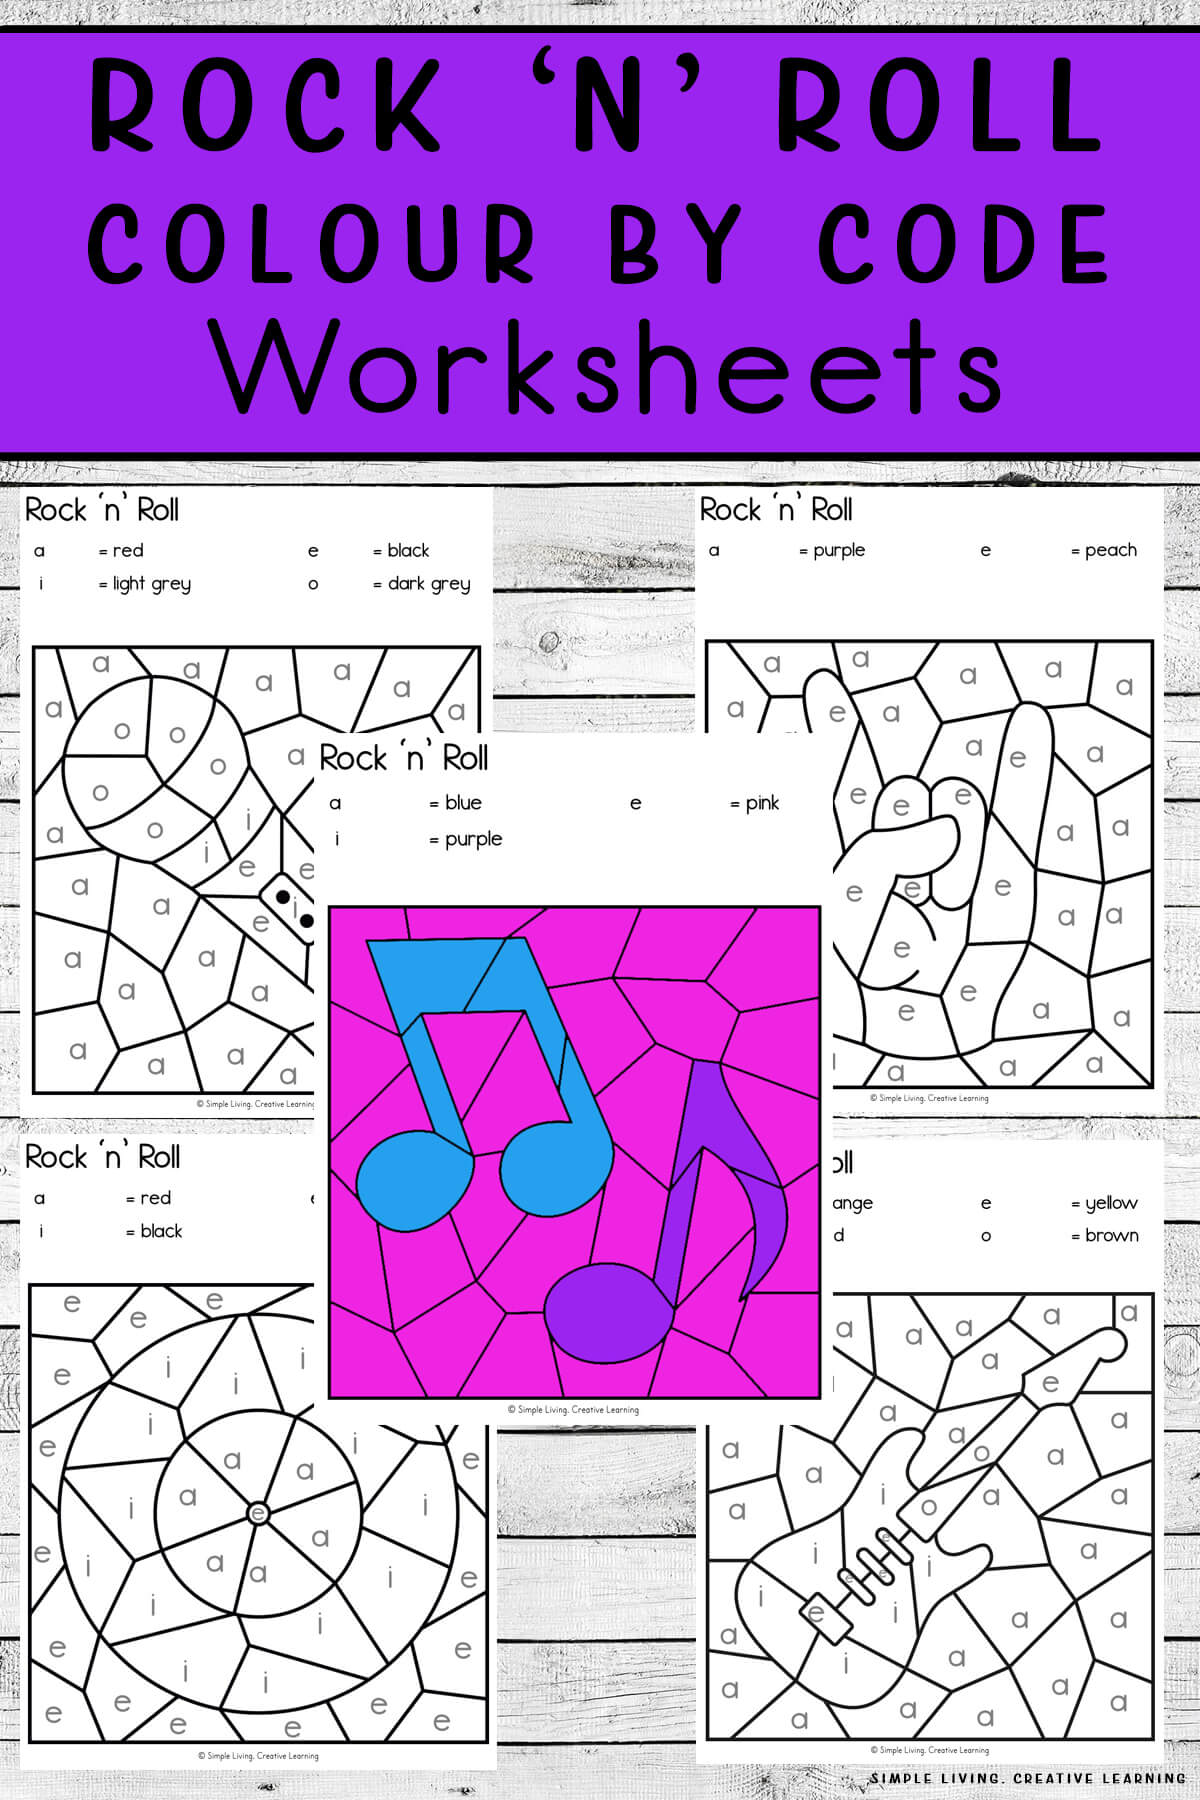 Rock 'n' Roll Colour By Code Worksheets